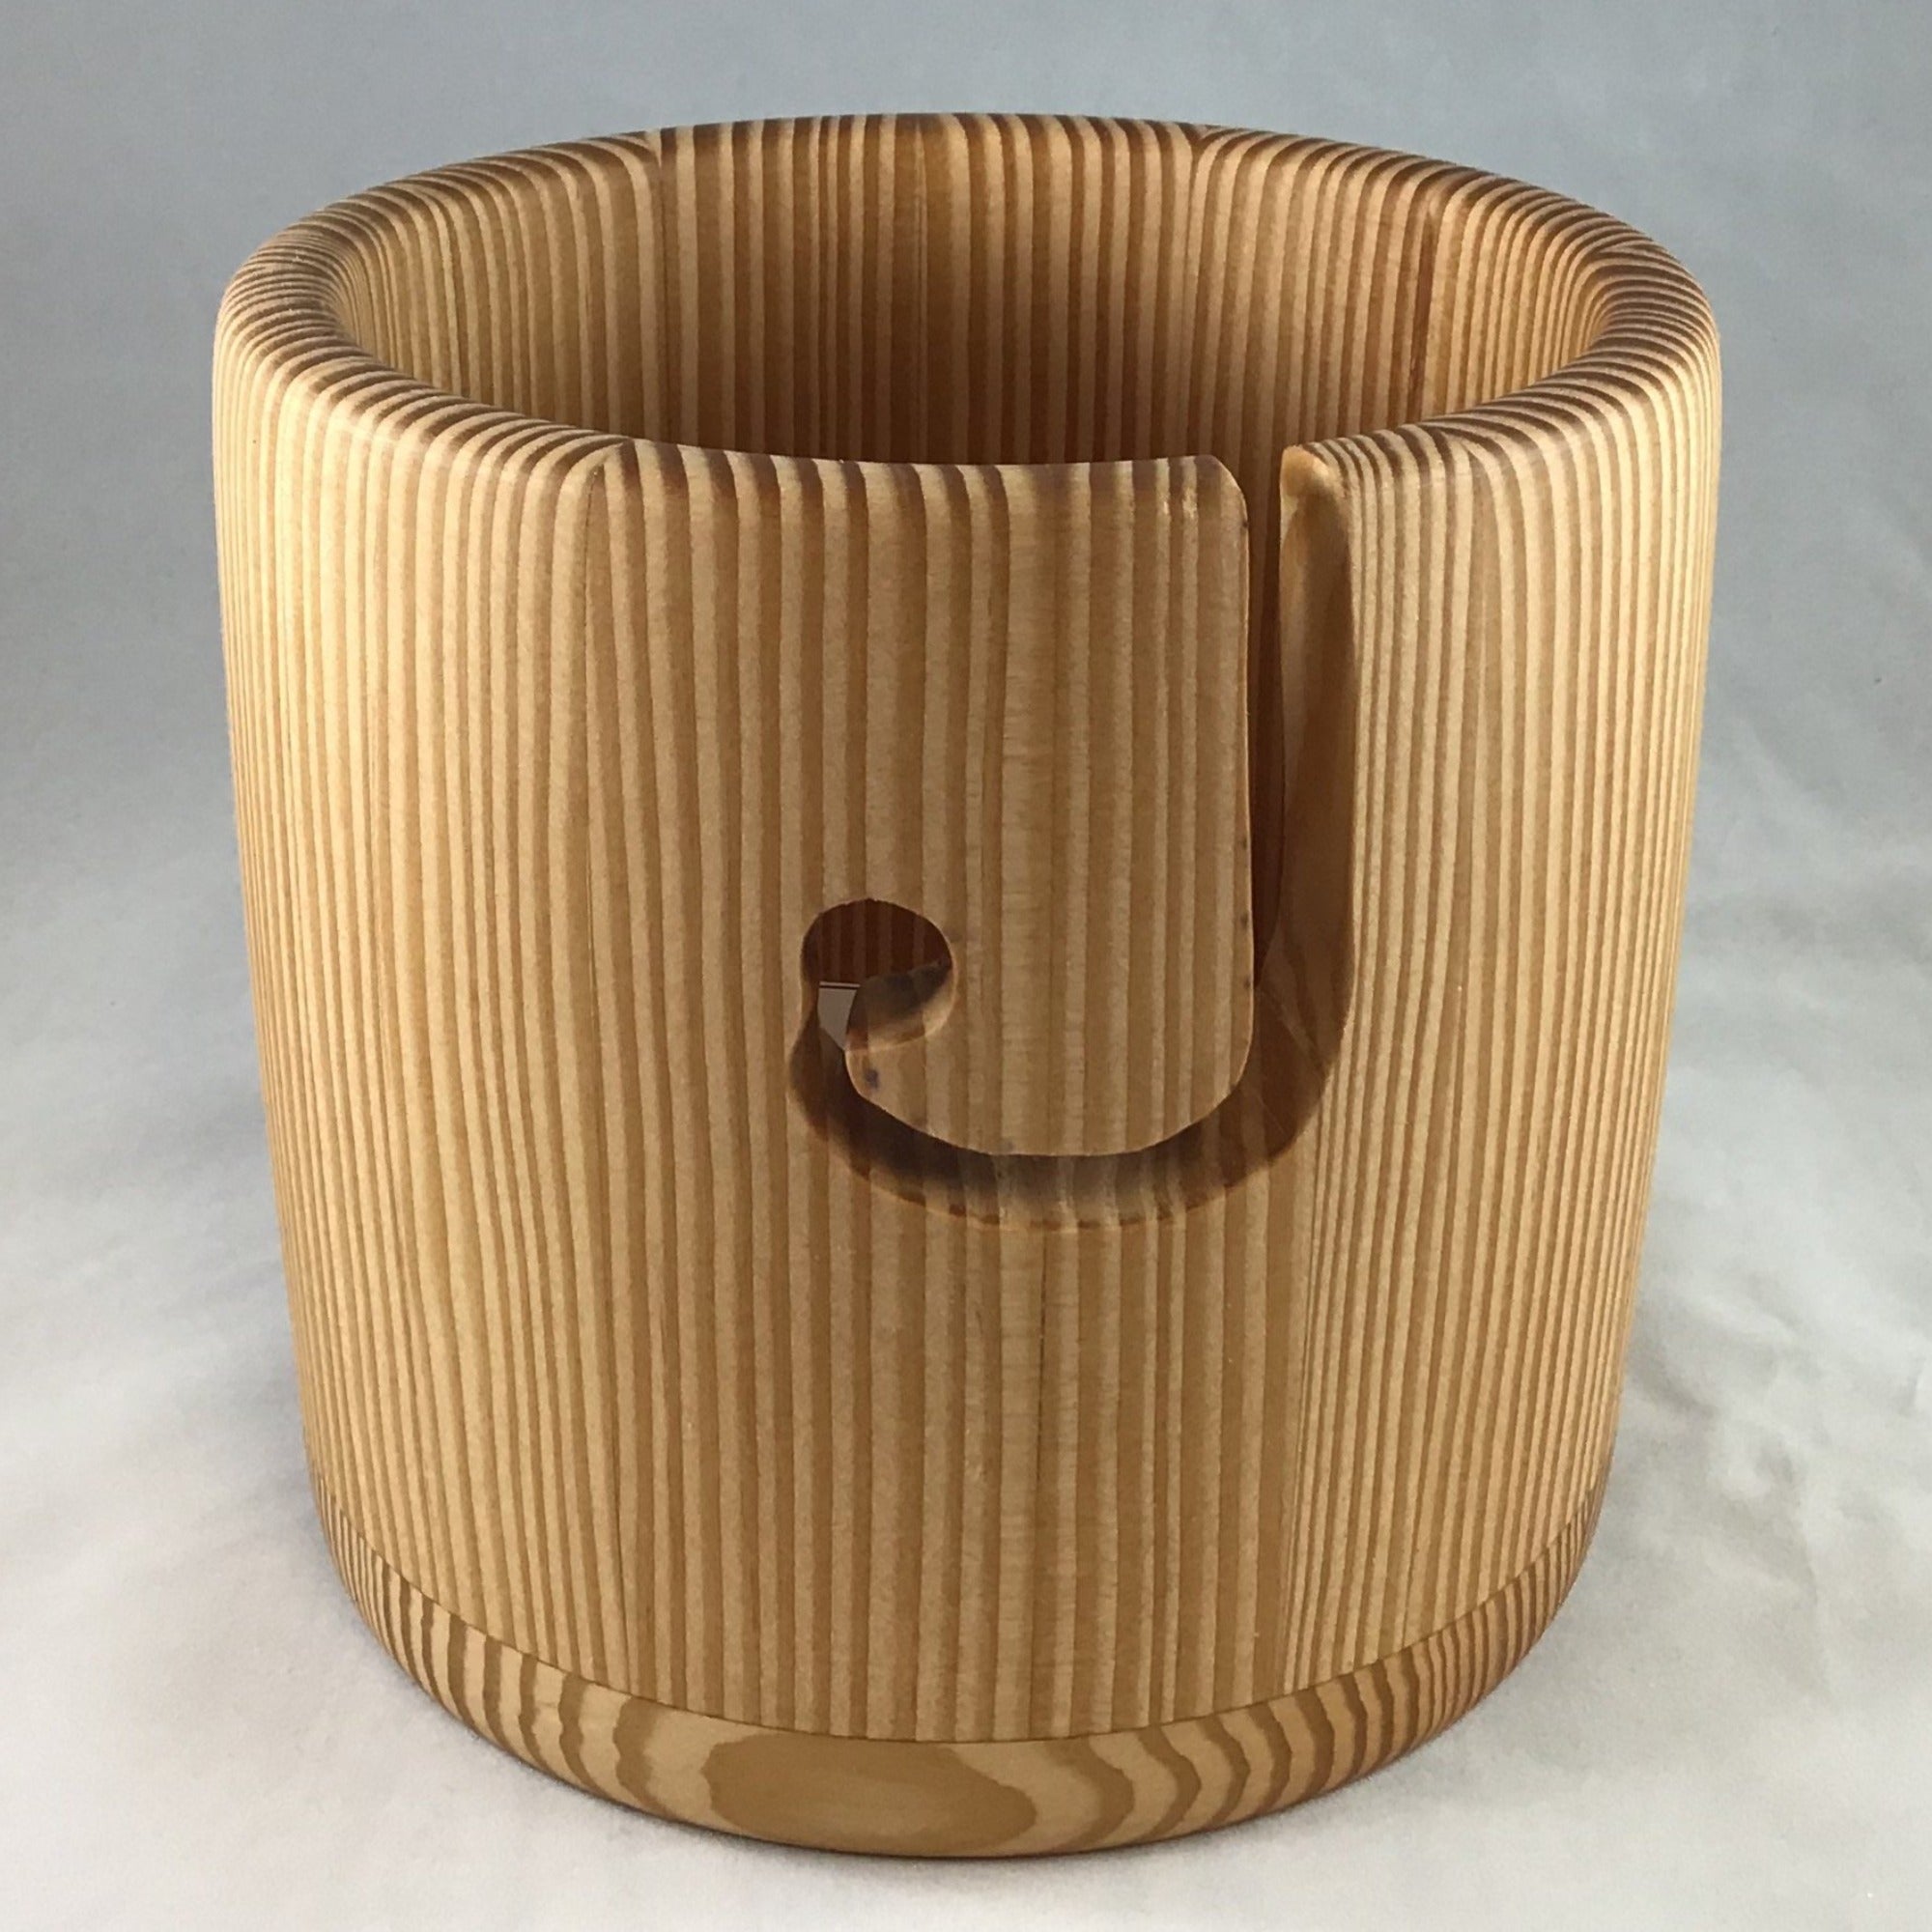  A wooden yarn bowl made from Douglas Fir wood against a white backdrop